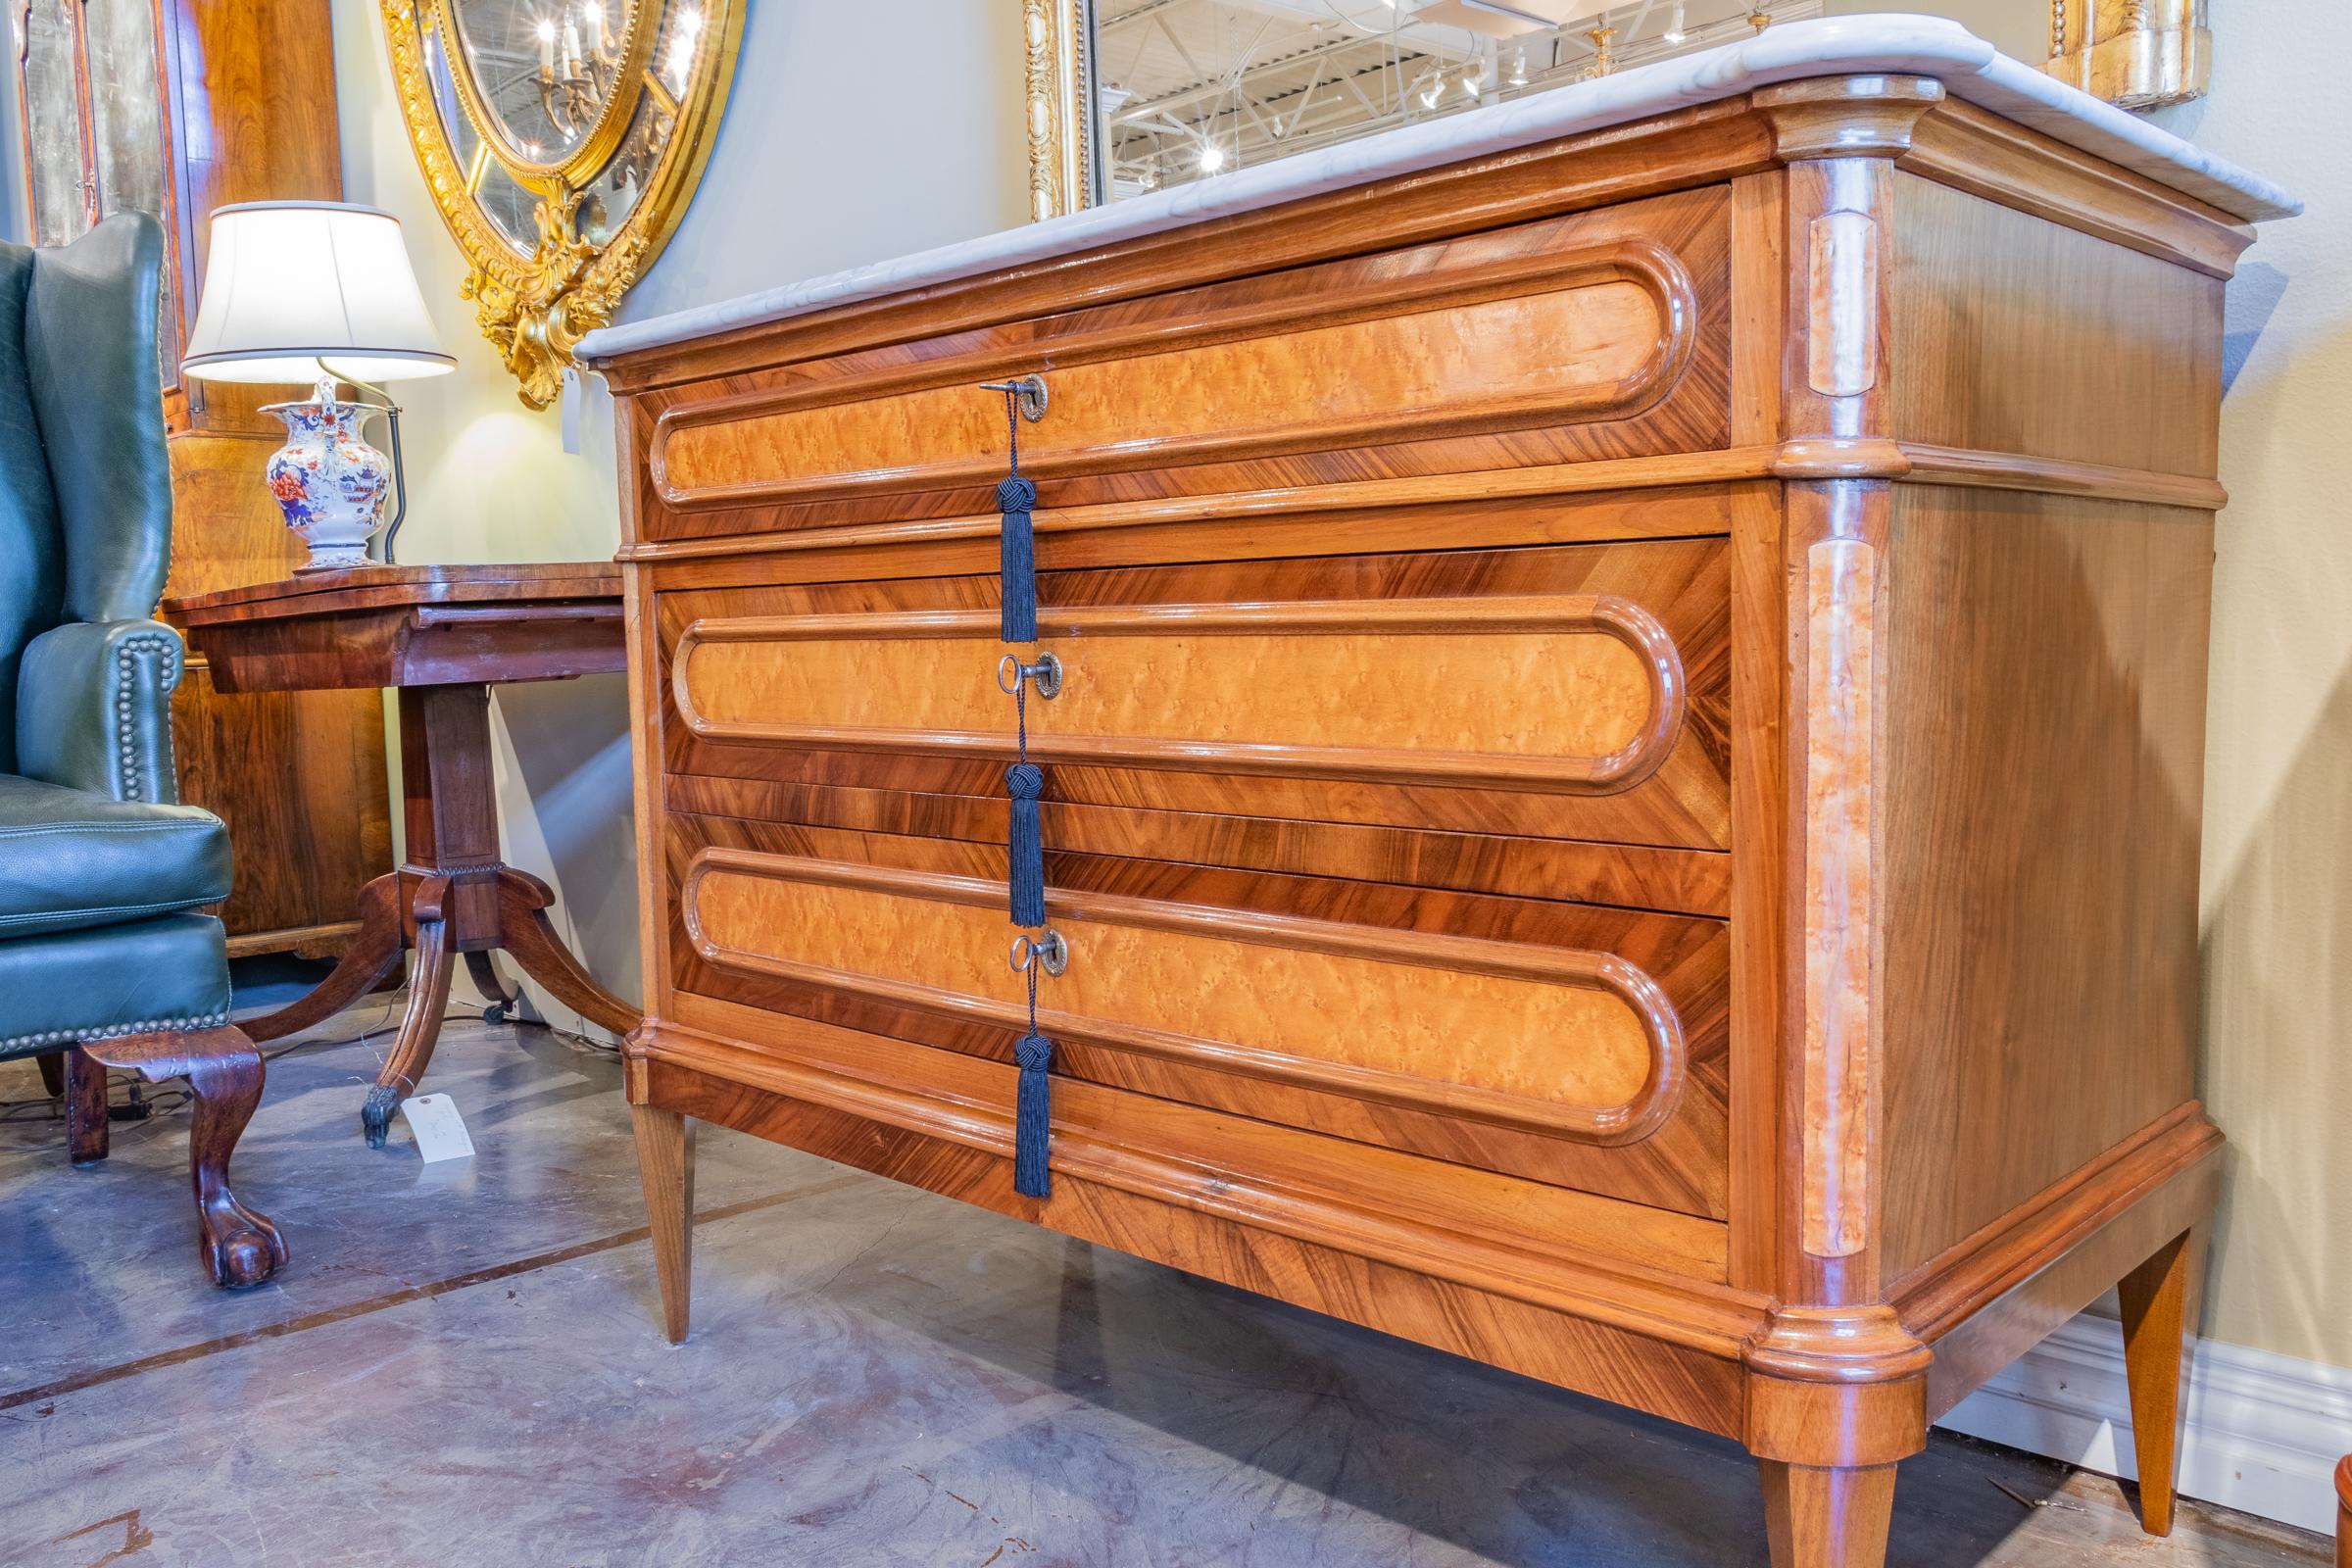 A fine pair of 19th century Italian Louis XVI Carrera marble-top commodes. Fine walnut and fruitwoods.